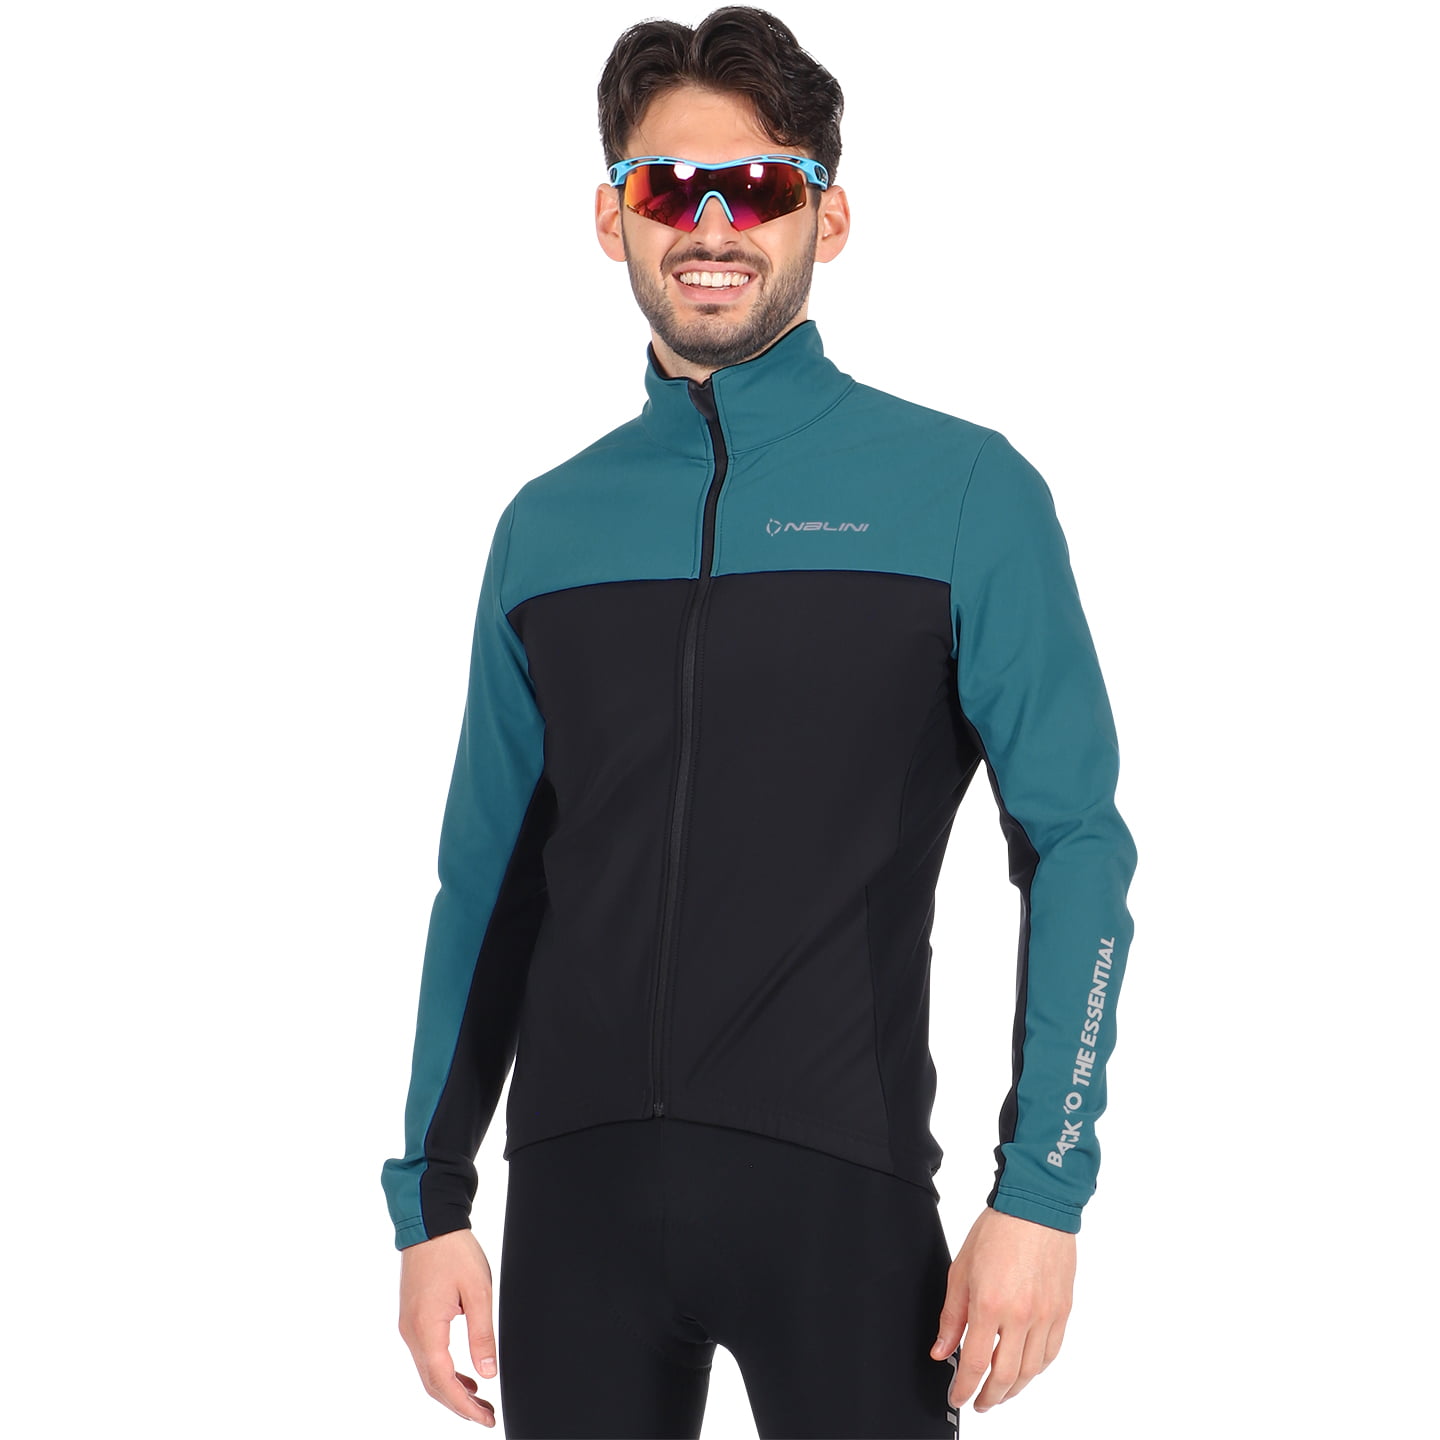 NALINI New Road Winter Jacket Thermal Jacket, for men, size 3XL, Cycle jacket, Cycling gear